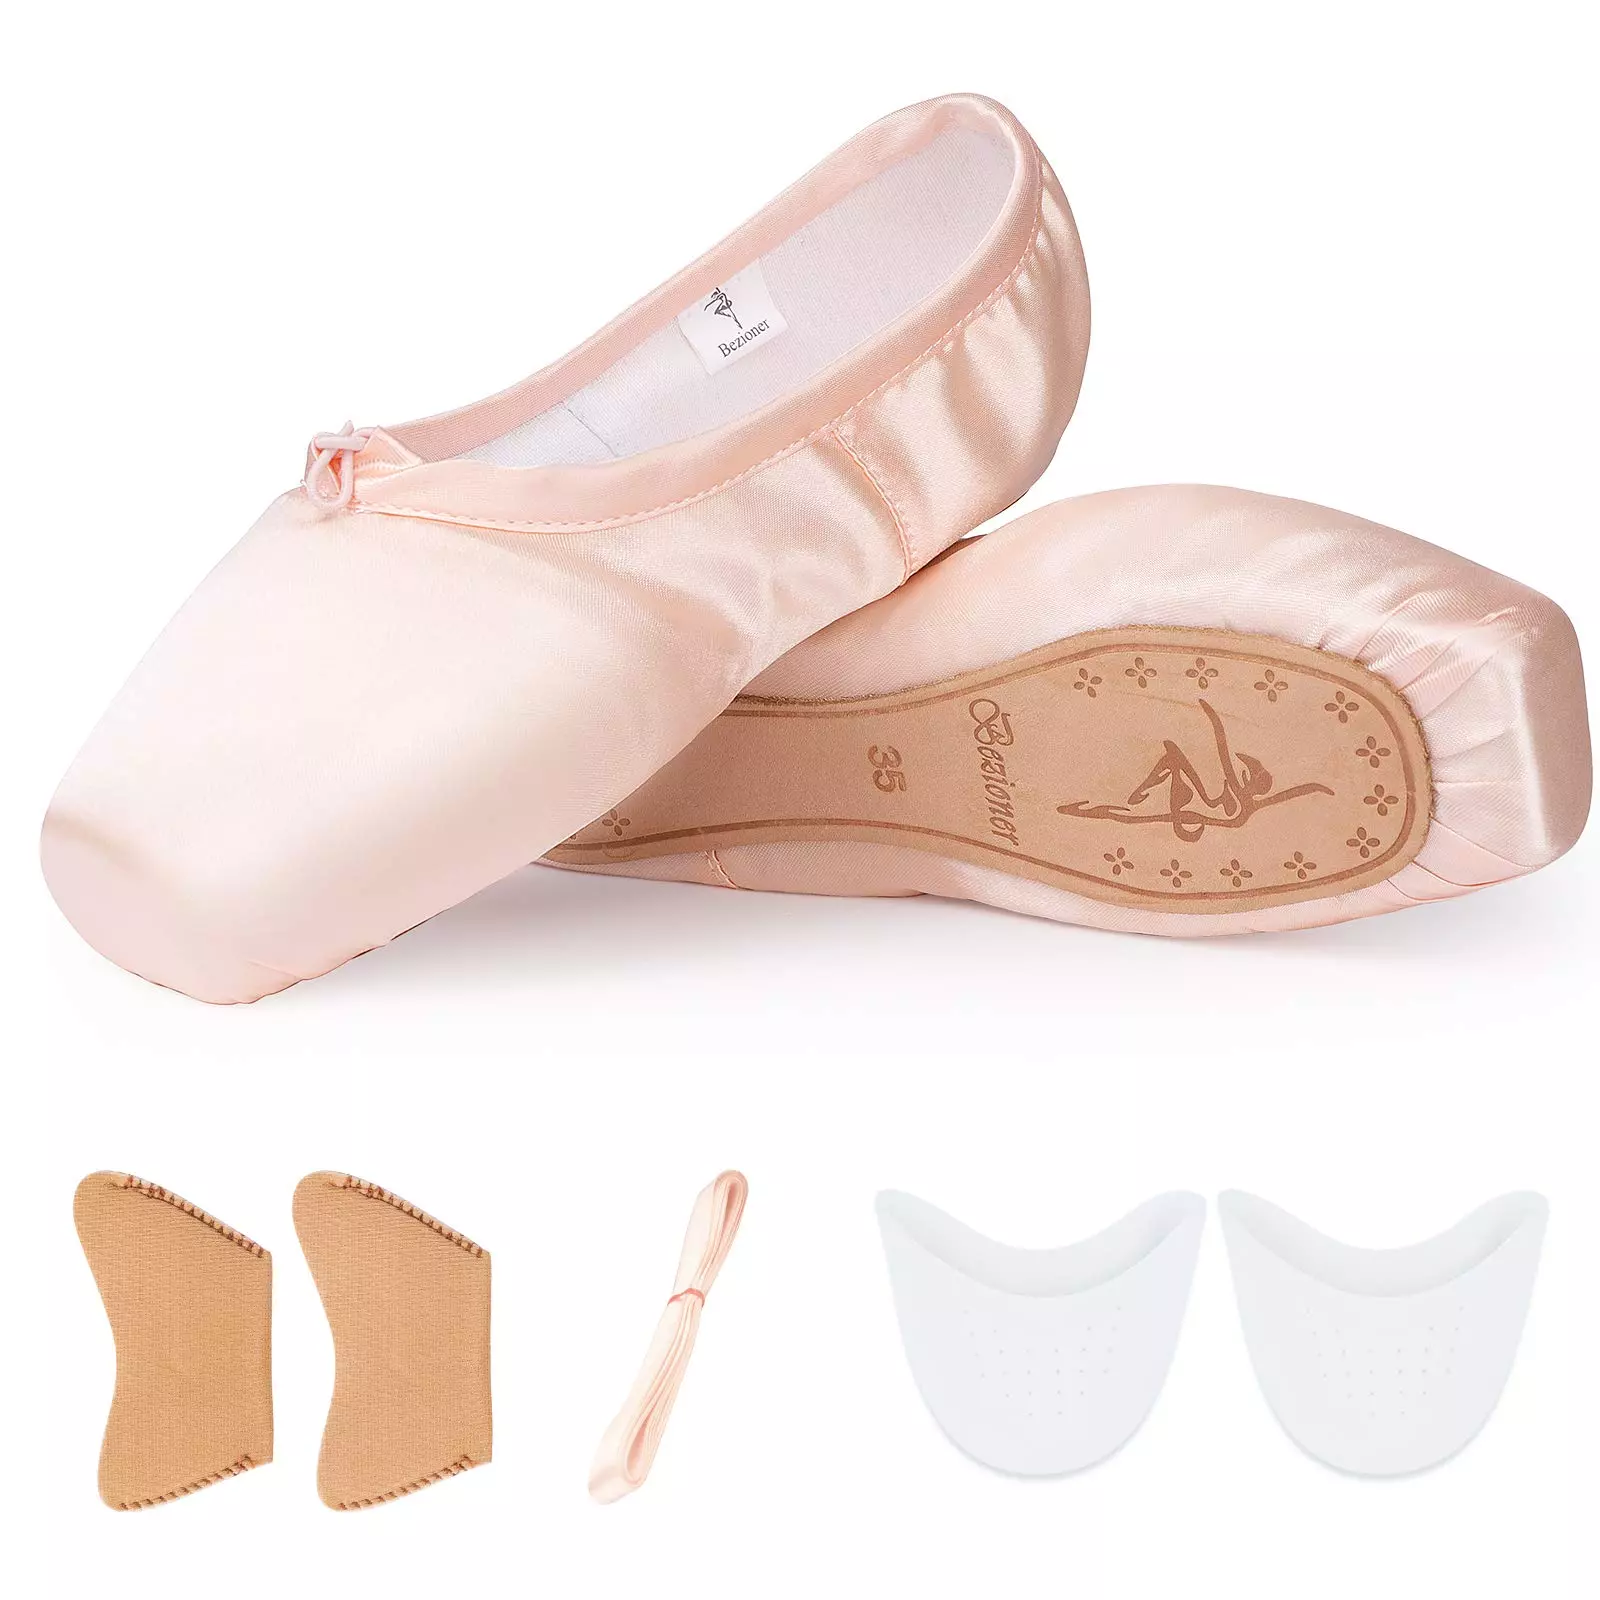 TXJ Sports Ballet Shoes Pink Point Ballet Shoes for Girls and Women